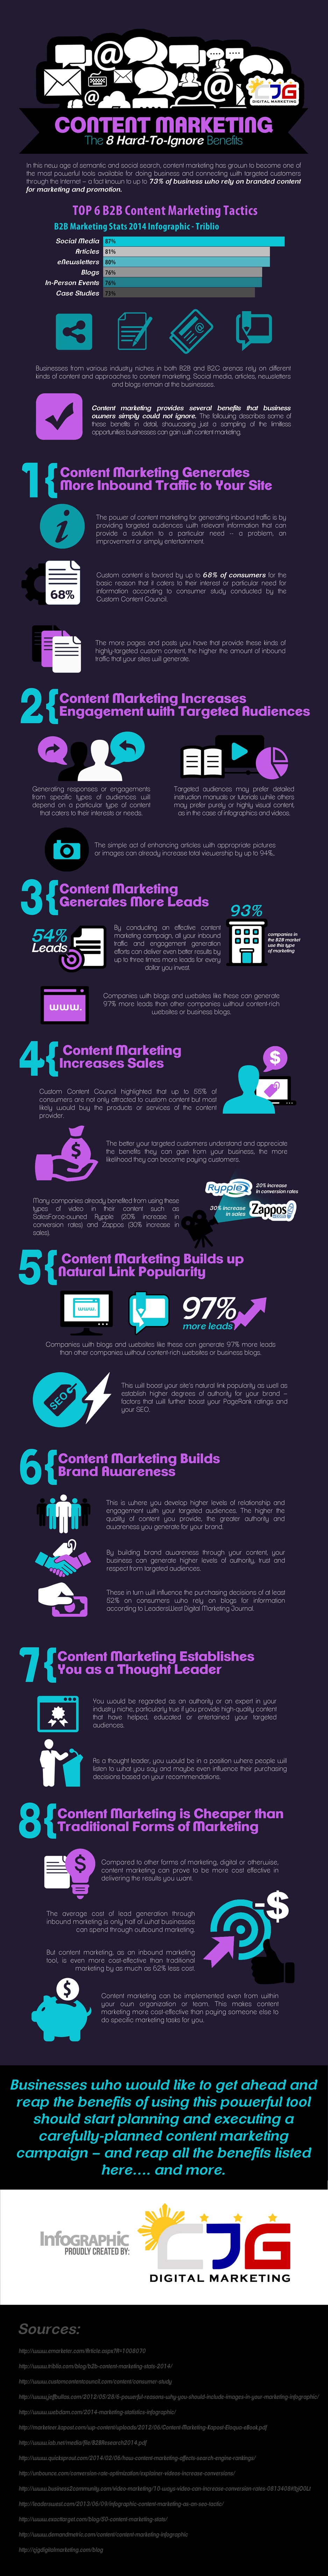 8 Hard-to-ignore Content Marketing Benefits (Infographic) - An Infographic from CJG Digital Marketing